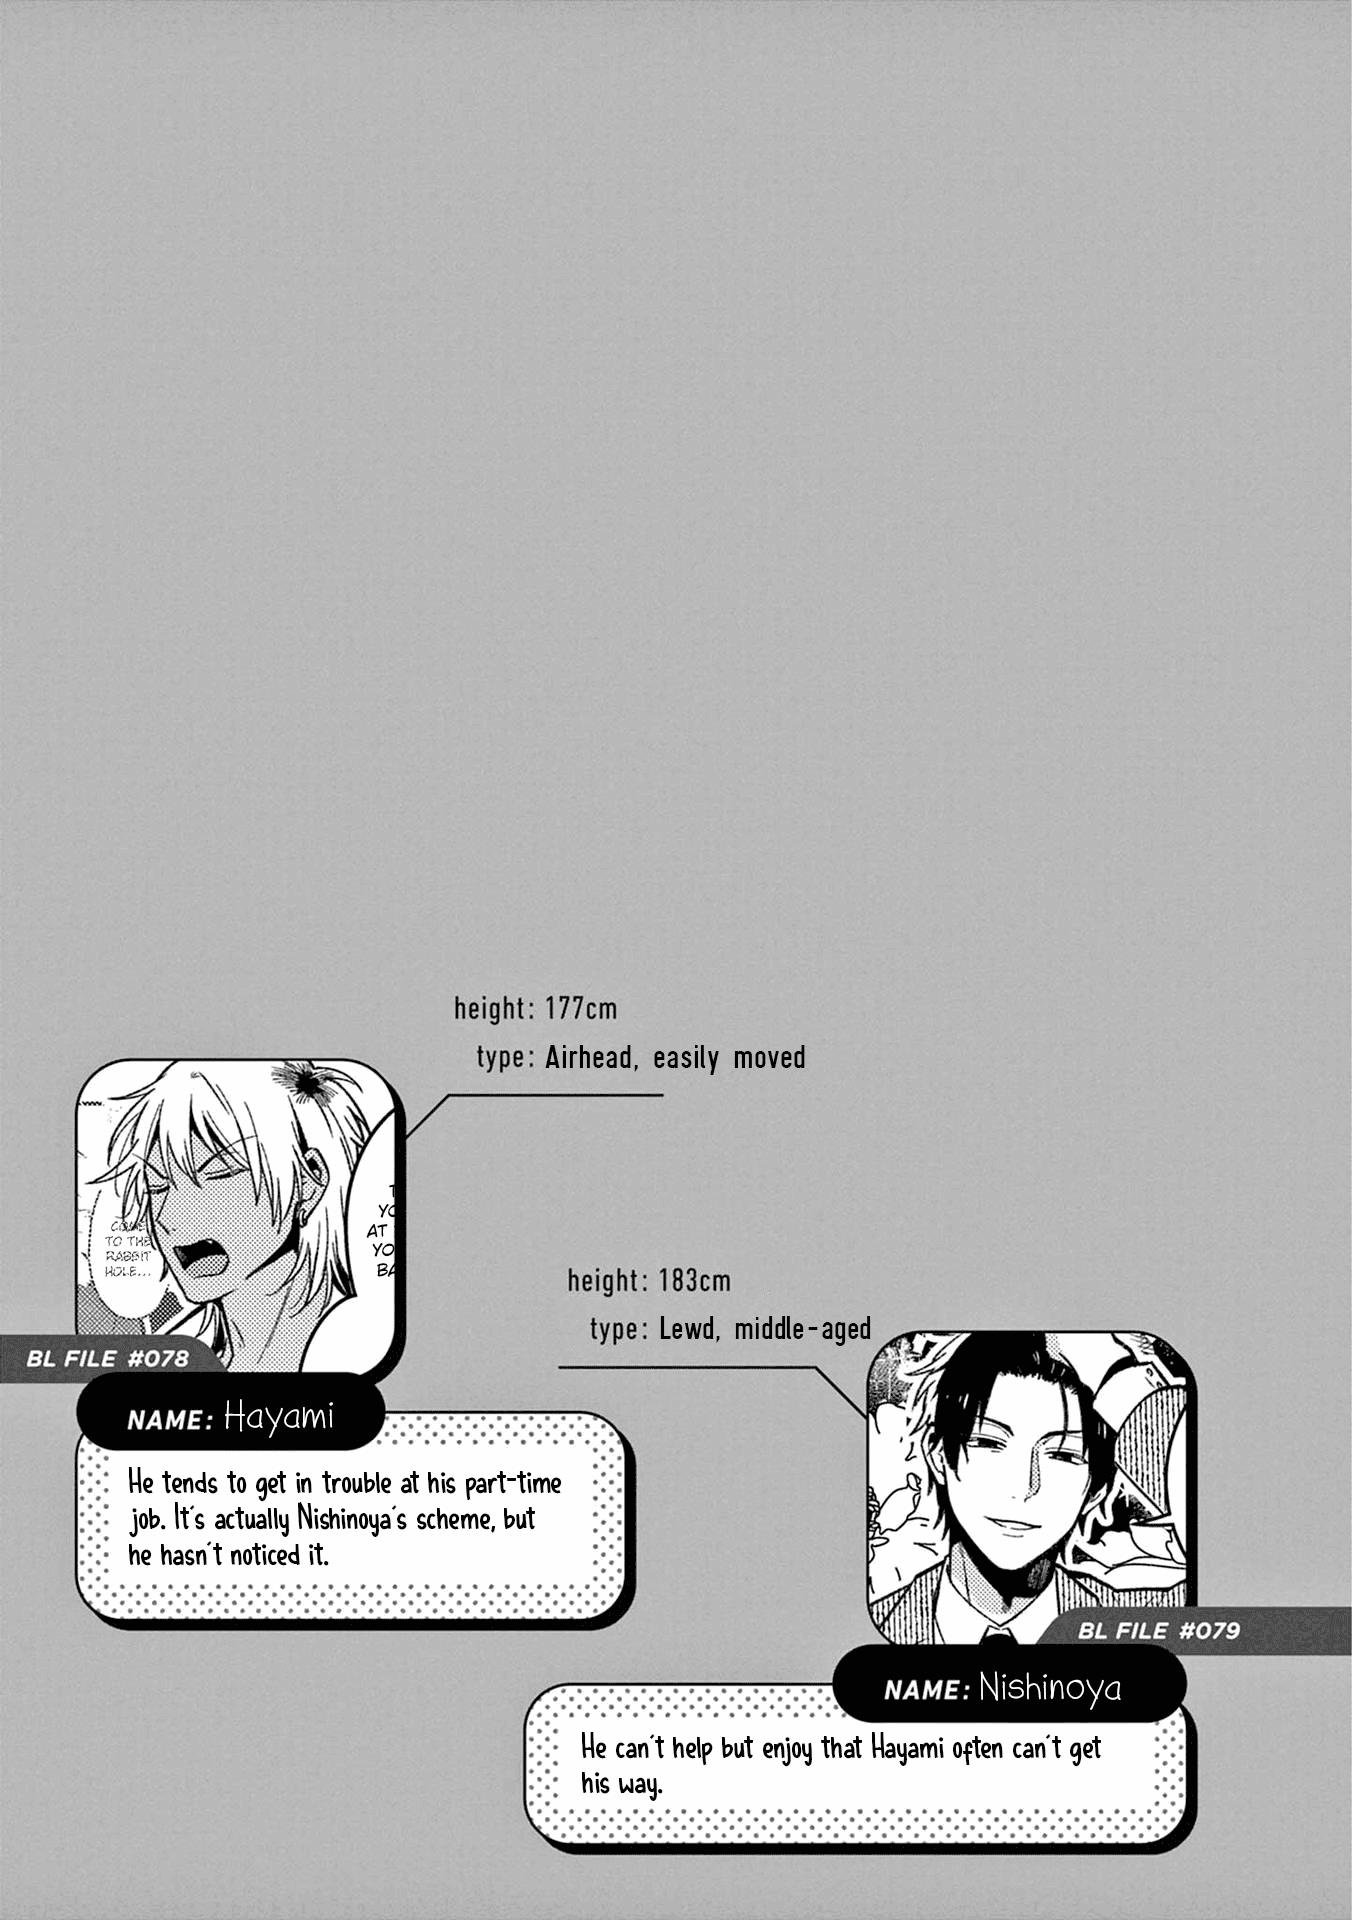 A World Where Everything Definitely Becomes Bl Vs. The Man Who Definitely Doesn't Want To Be In A Bl - Page 4